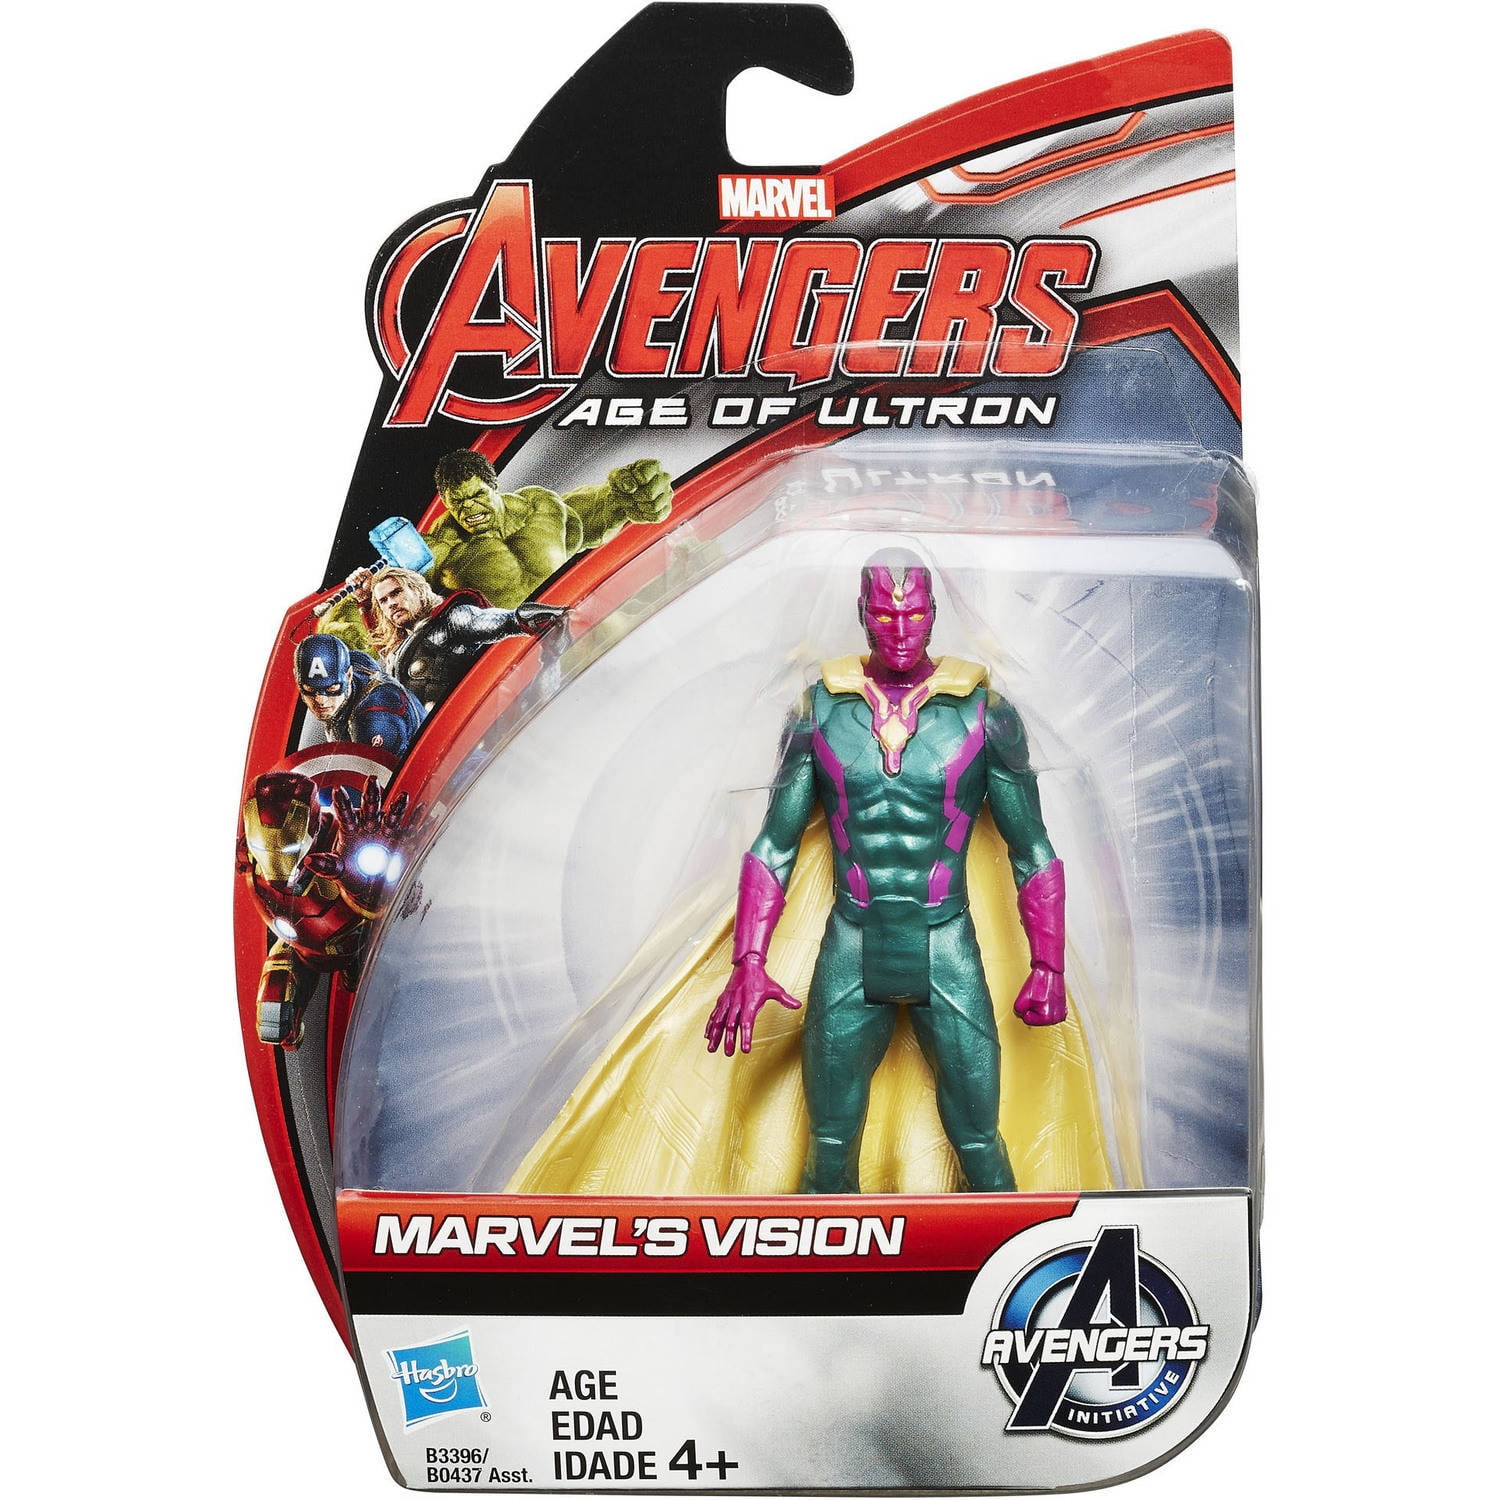 Marvel Avengers Age of Ultron Marvel s Vision Action Figure 3 75 Inches